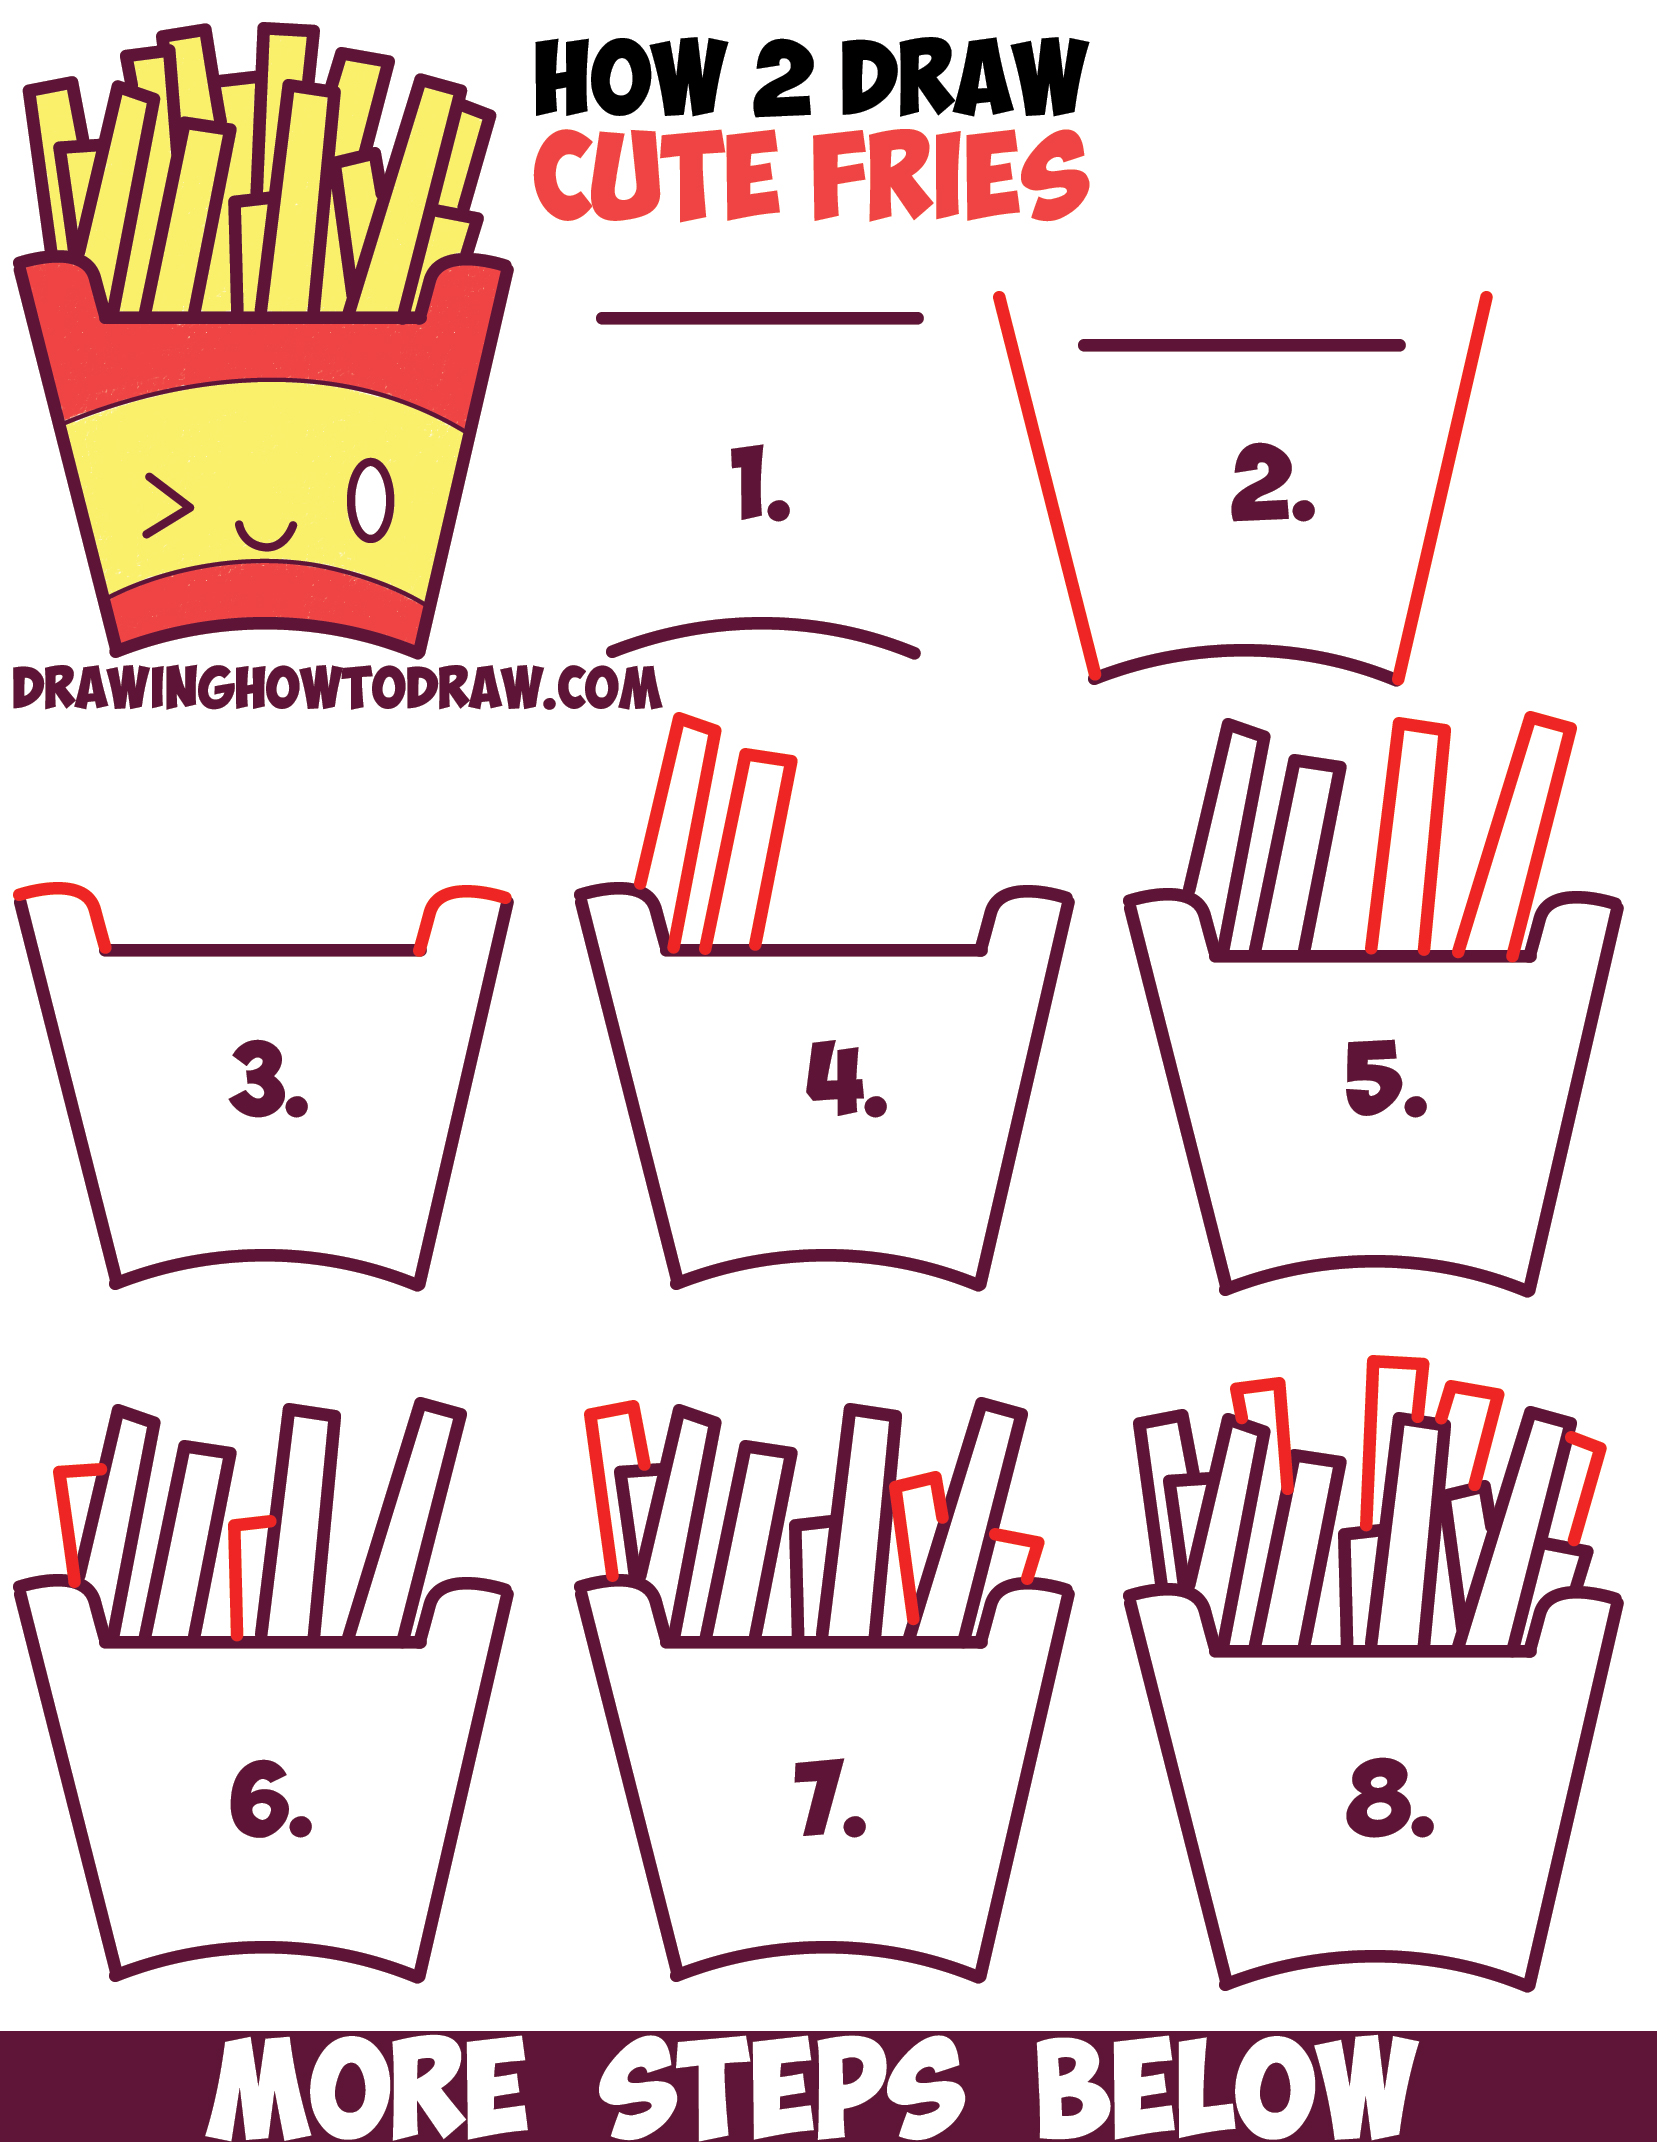 How to Draw a Cute French Fries by drawingartificer on DeviantArt